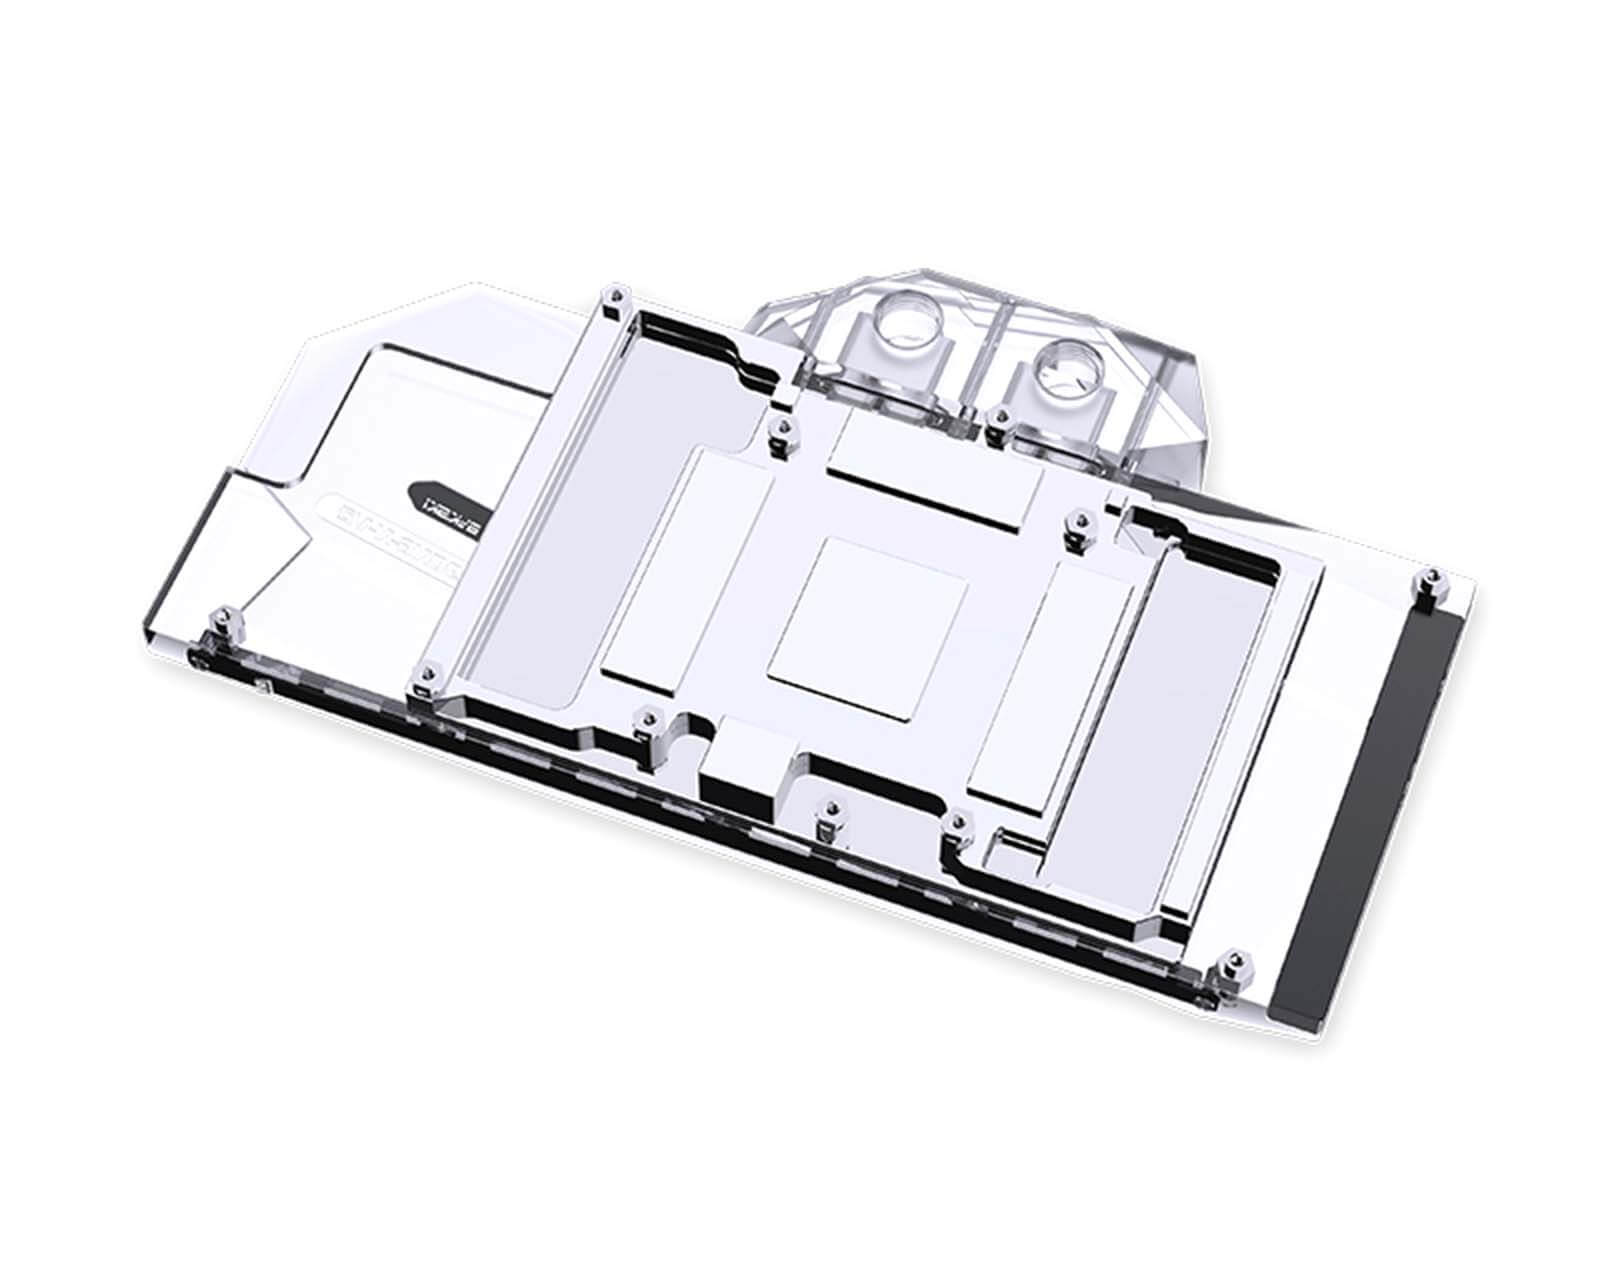 Bykski Full Coverage GPU Water Block and Backplate for AIC Reference RTX 3080/3090 - Version 2 (N-RTX3090H-X-V2) - PrimoChill - KEEPING IT COOL